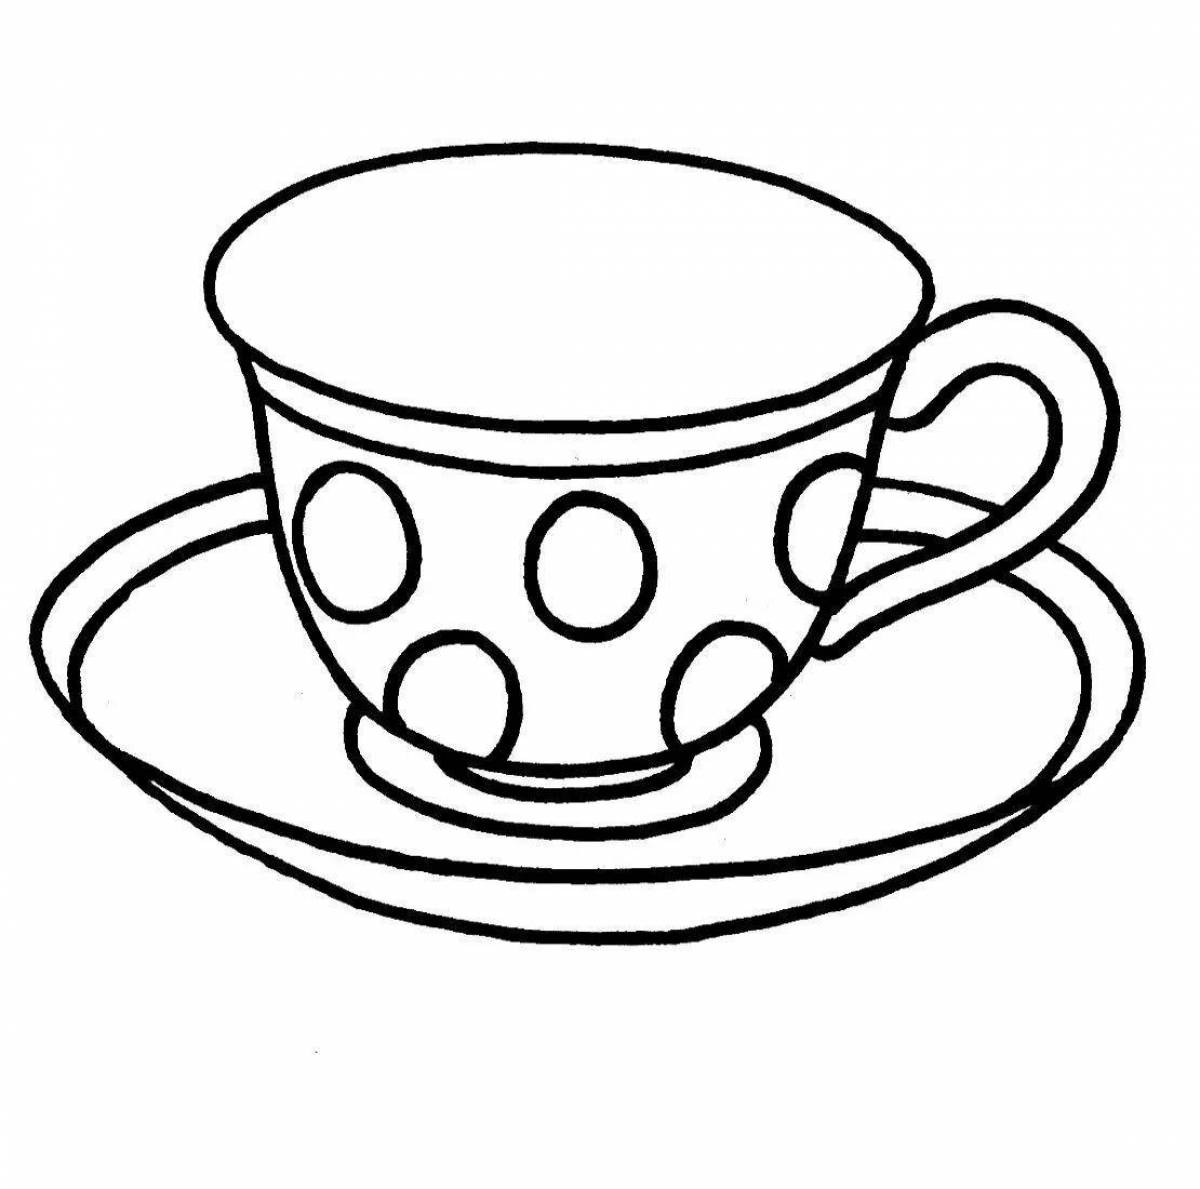 Sparkling tea cup coloring book for kids